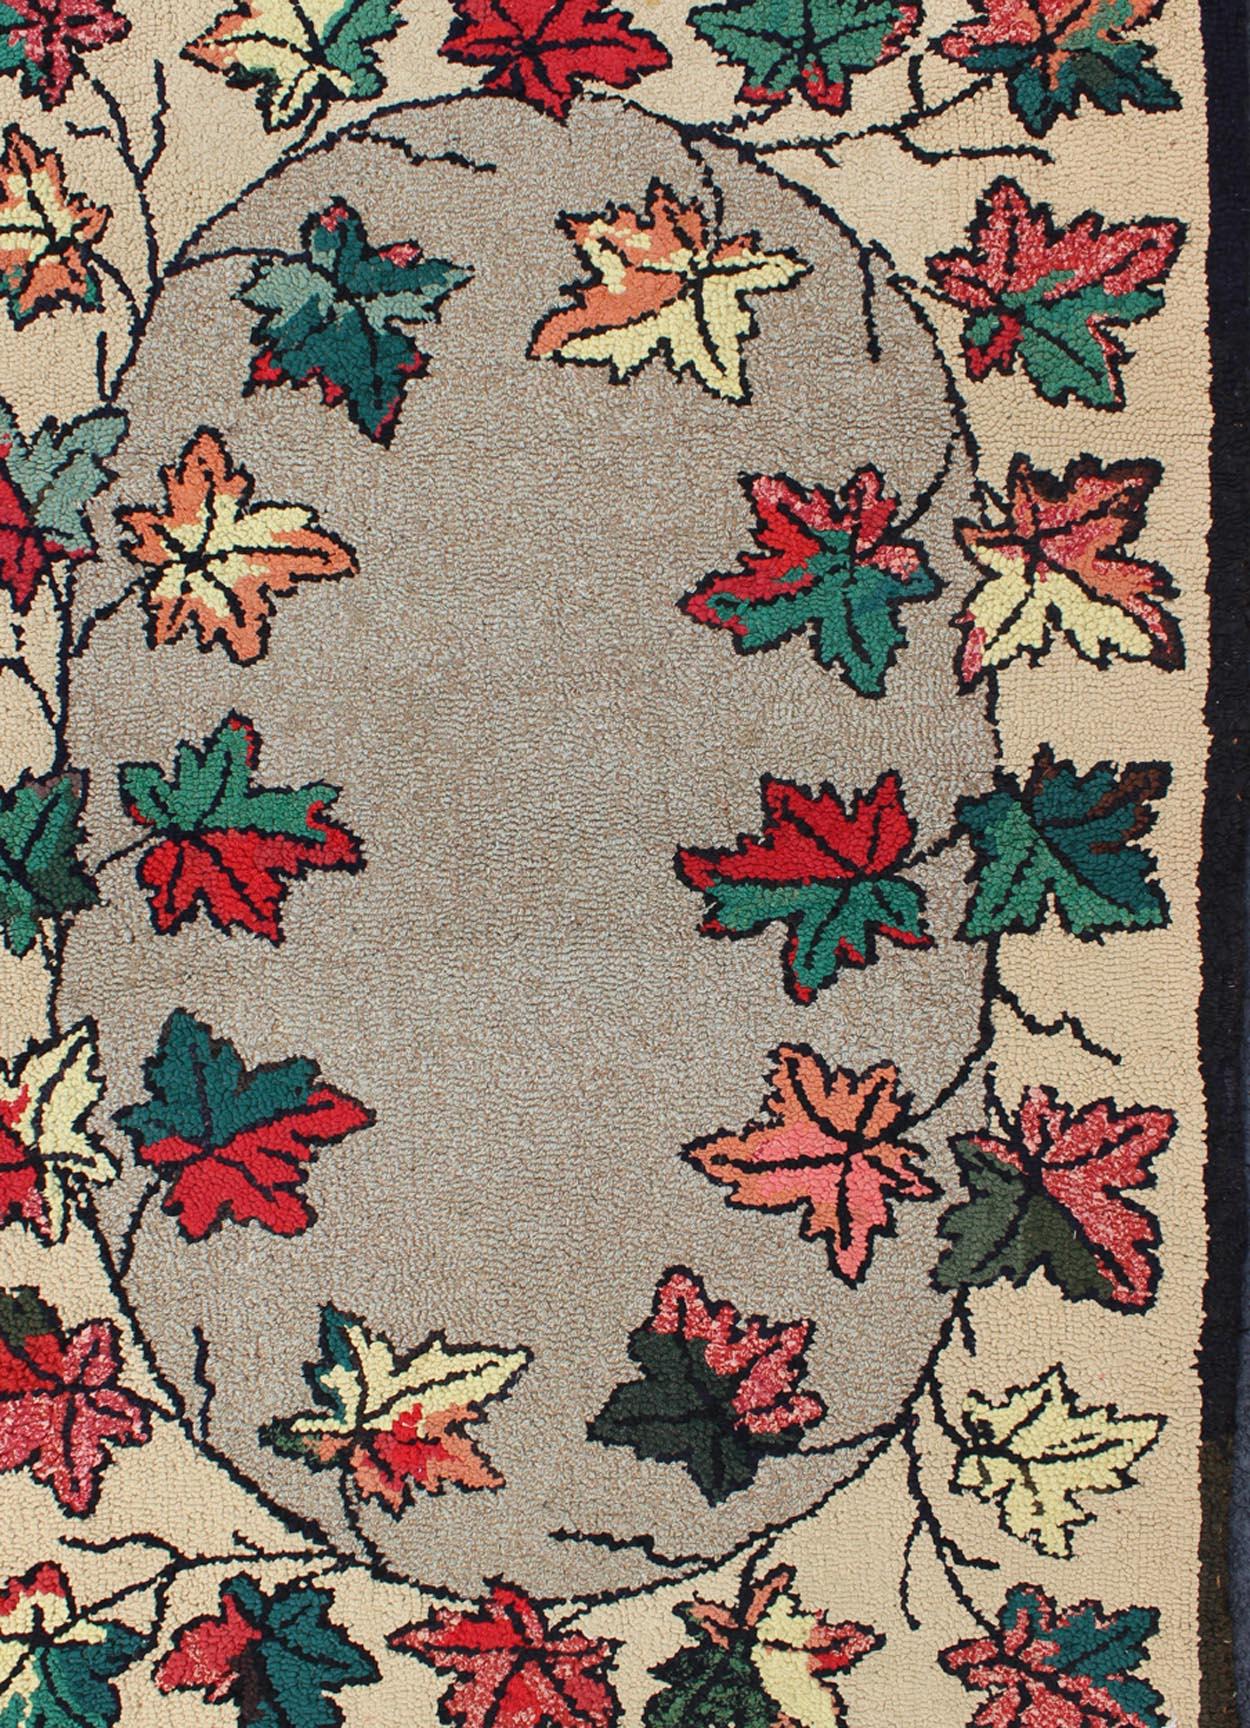 Vintage American hooked rug with leaf design, Keivan Woven Arts / rug S12-0305, country of origin / type: United States / Hooked, circa 1930

Ingenious in style, color and composition, the features in this spectacular, vintage American Hooked rug